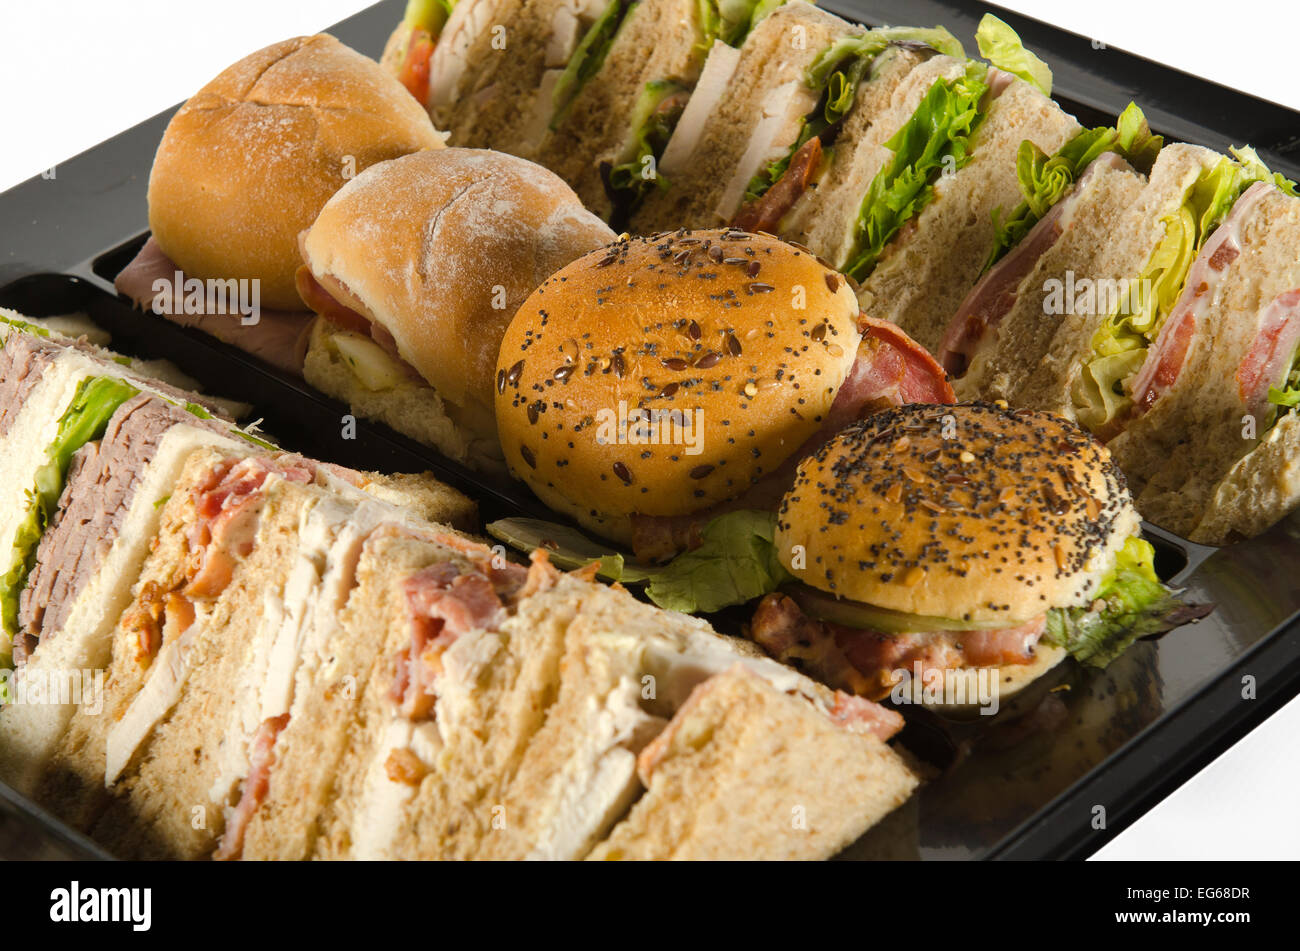 a plate of party food, wraps rolls and sandwiches Stock Photo